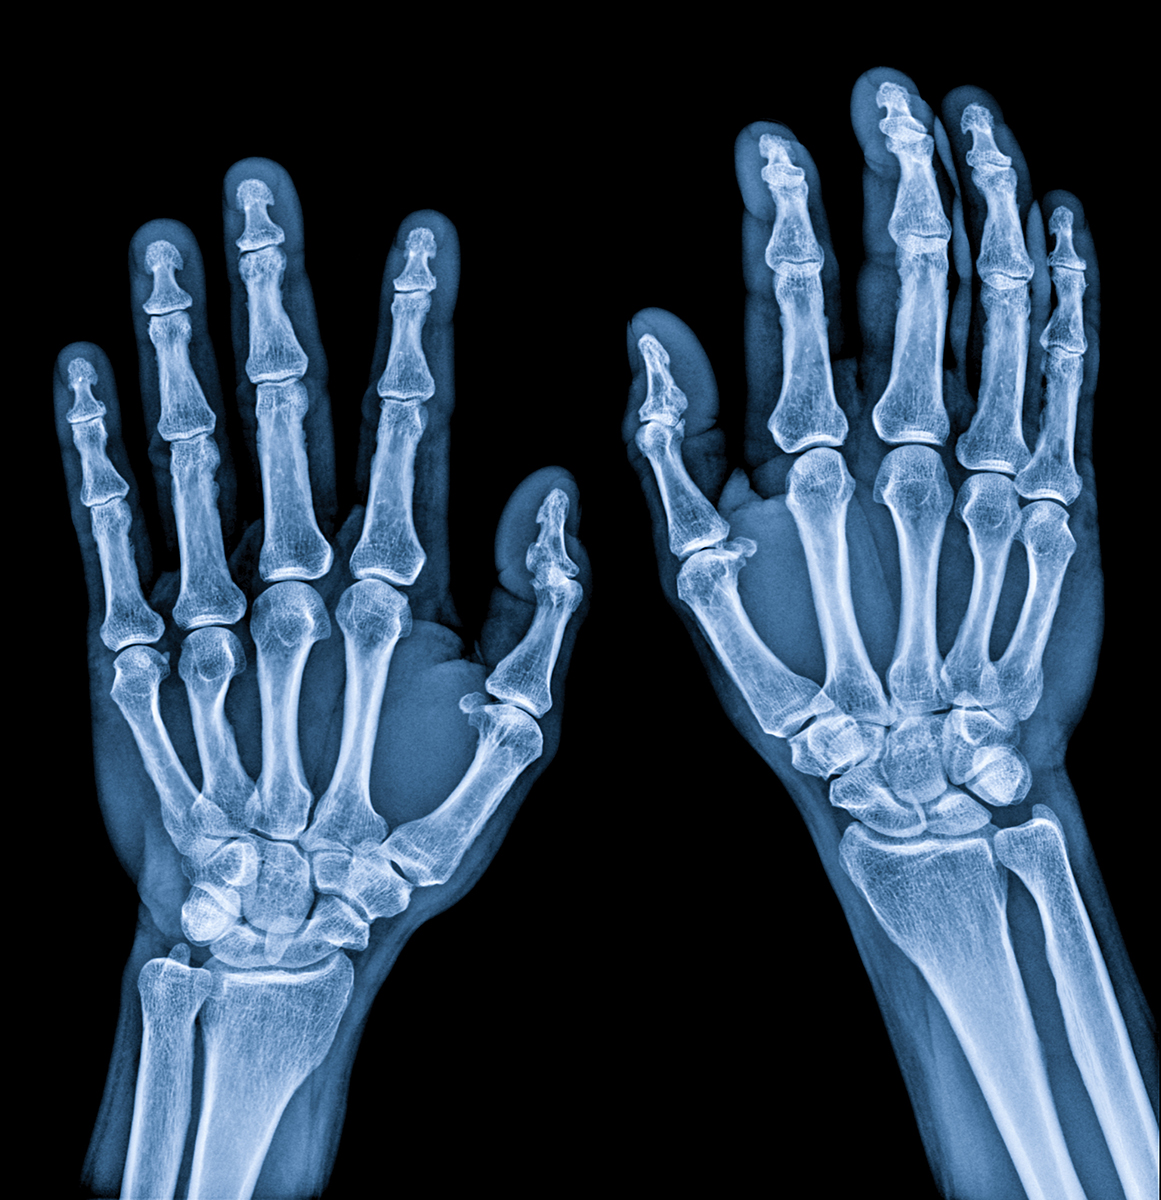 X-ray image of two hands